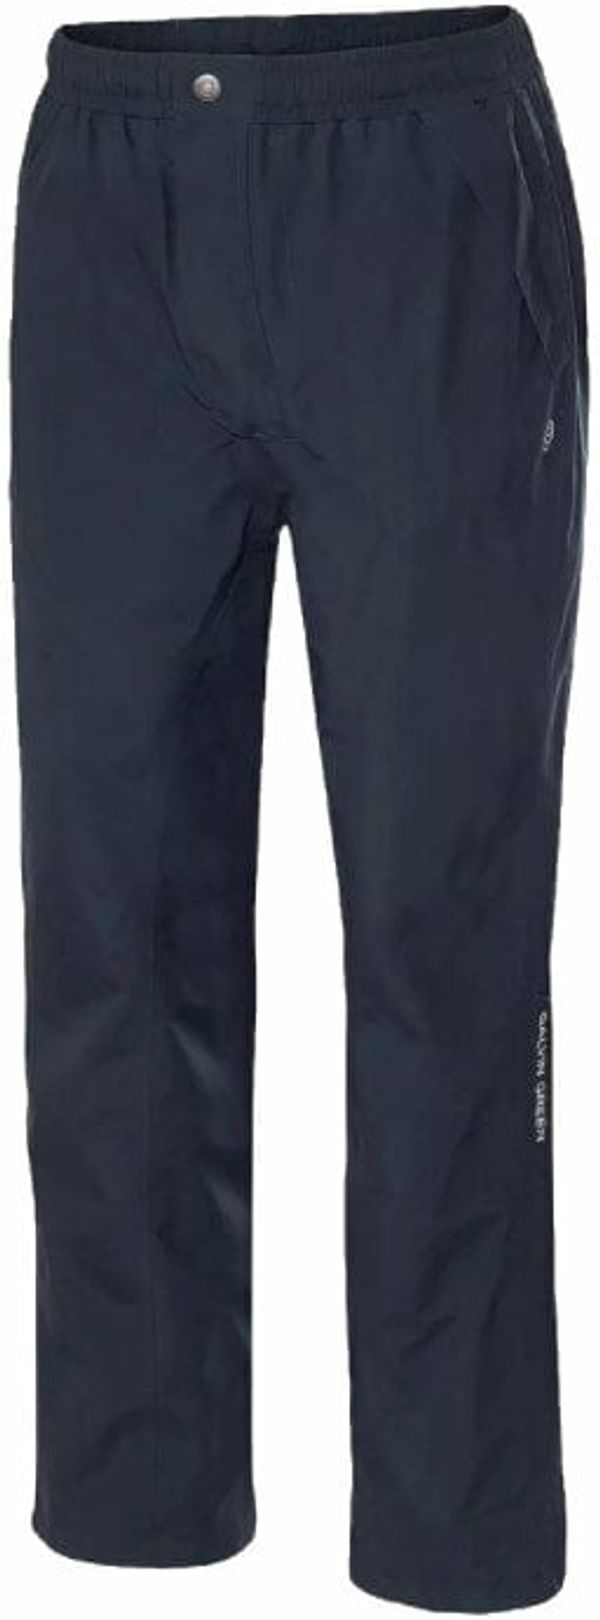 Galvin Green Galvin Green Andy Trousers Navy 4XL